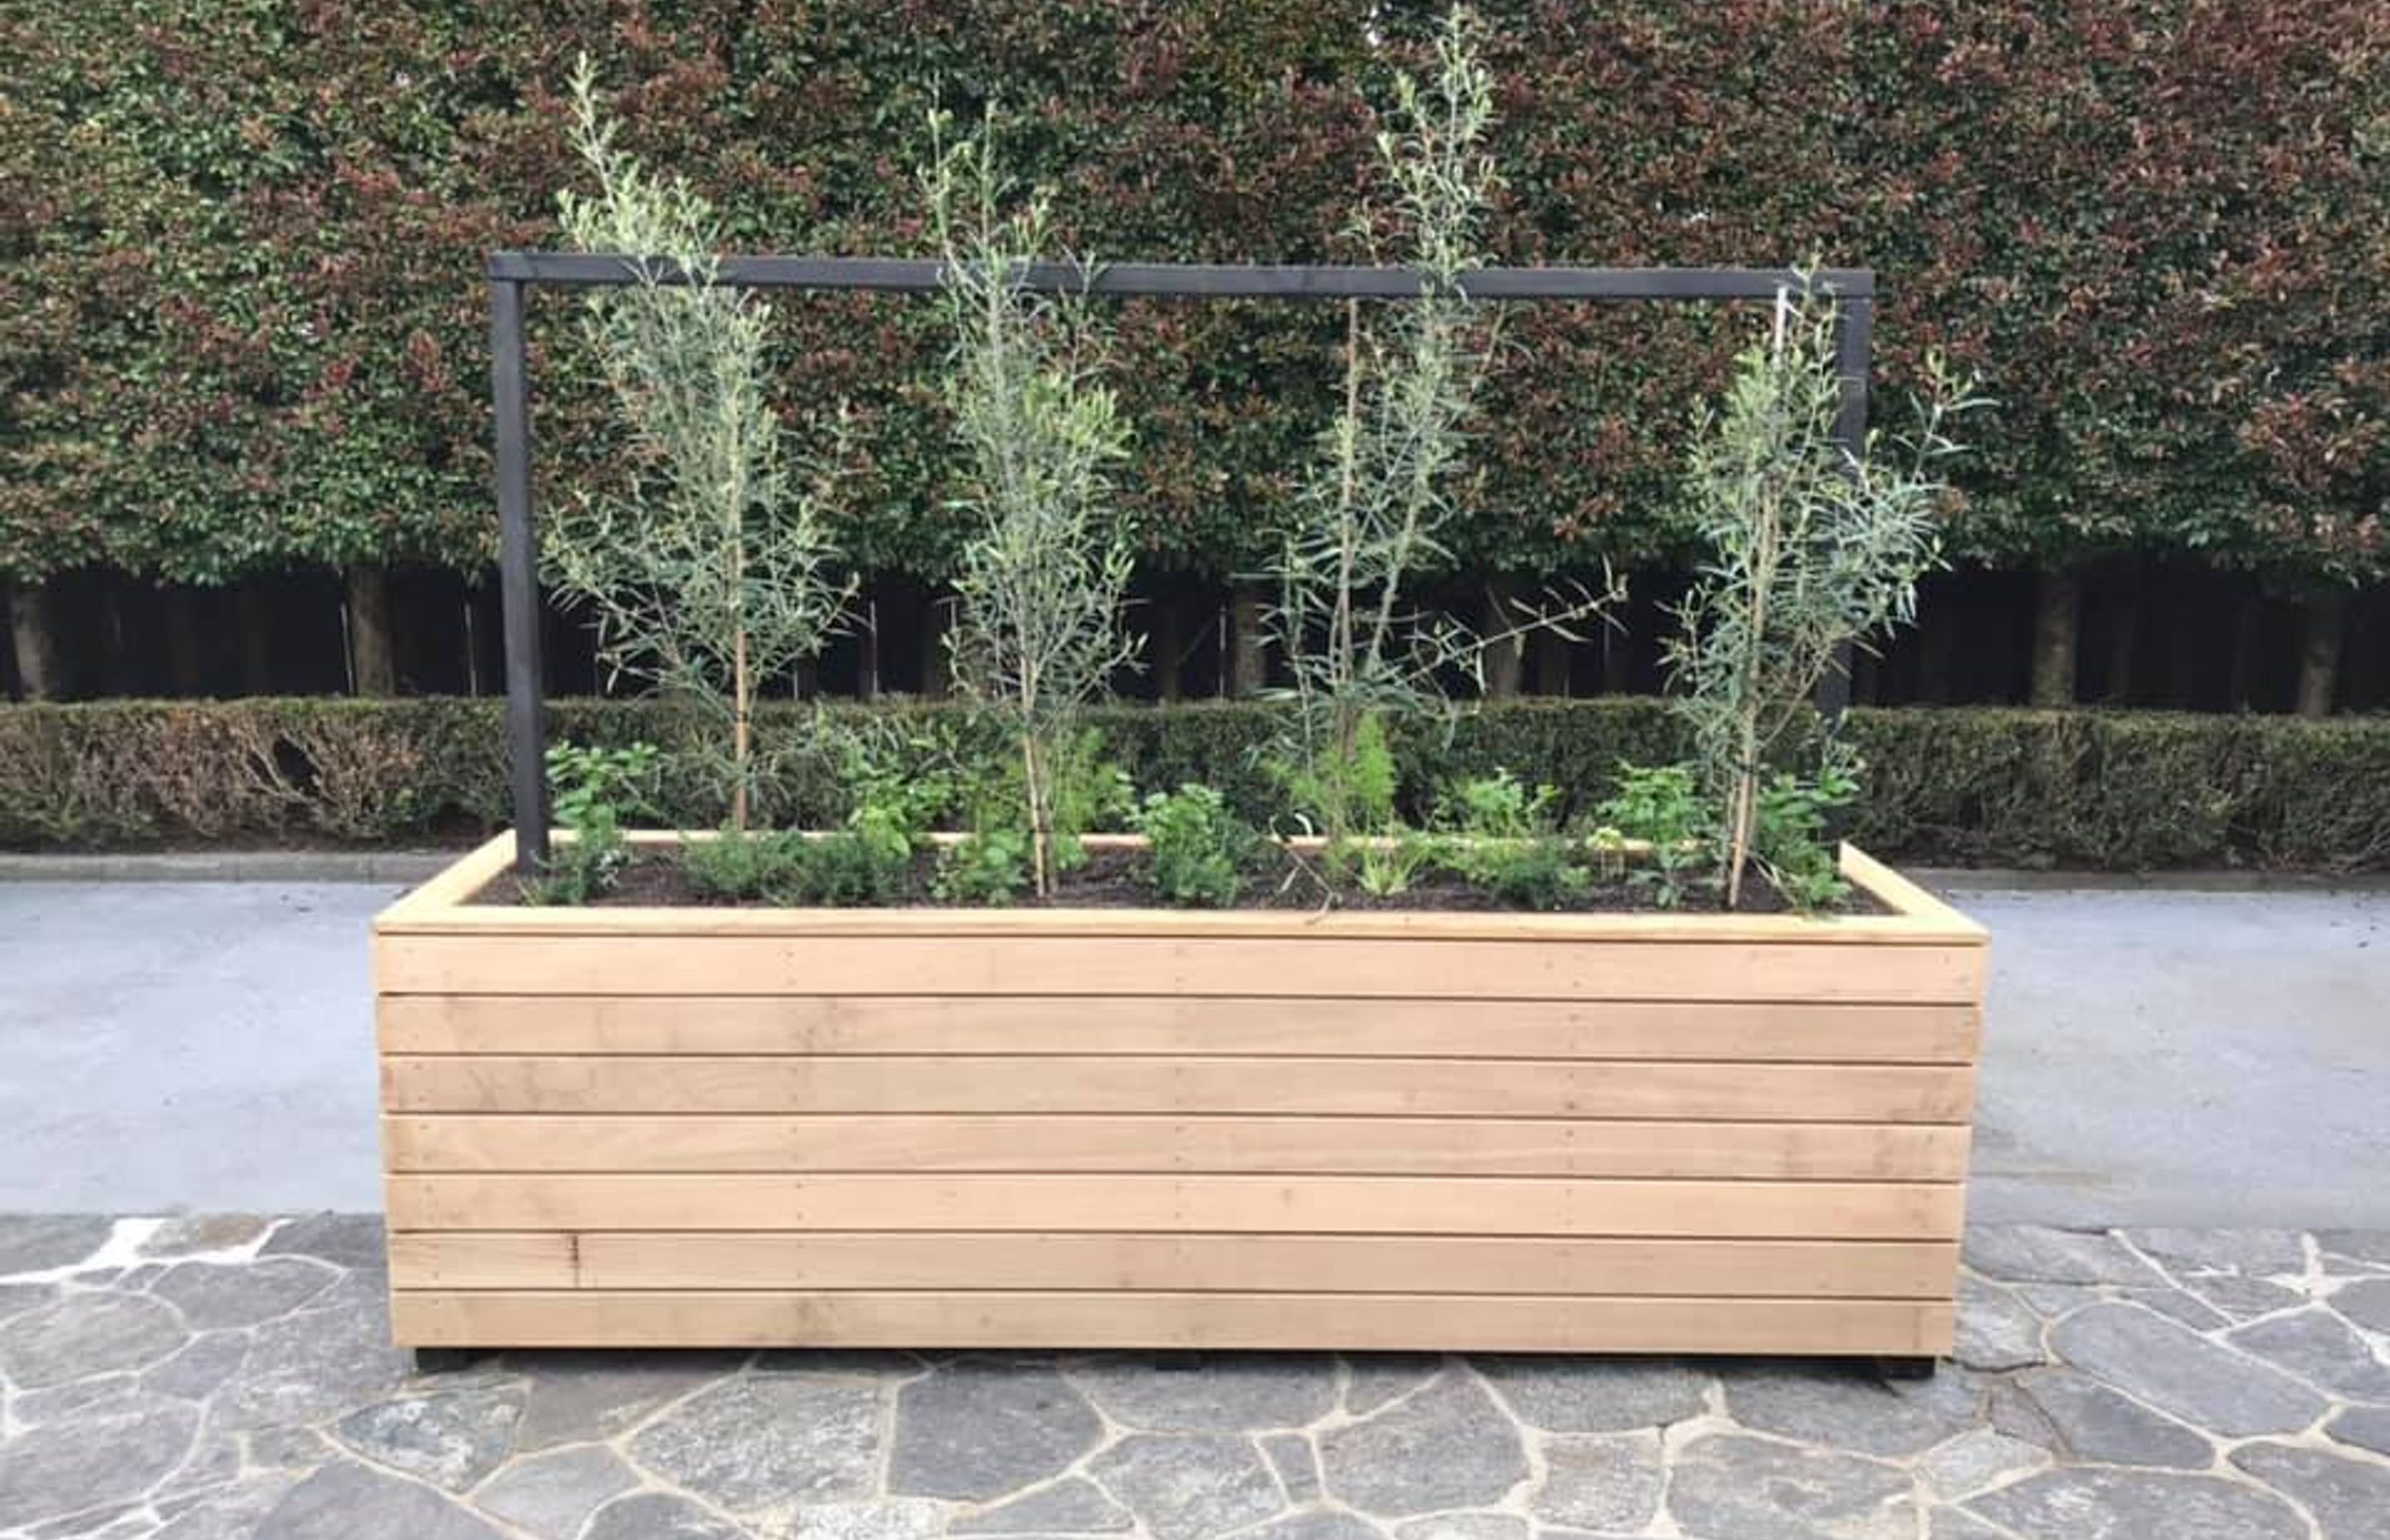 Almafi Box - inspired by the Italian Almafi coast, this box is constructed using vitex hardwood, left to weather. it is planted with mediterranean edibles providing a classic med vibe.